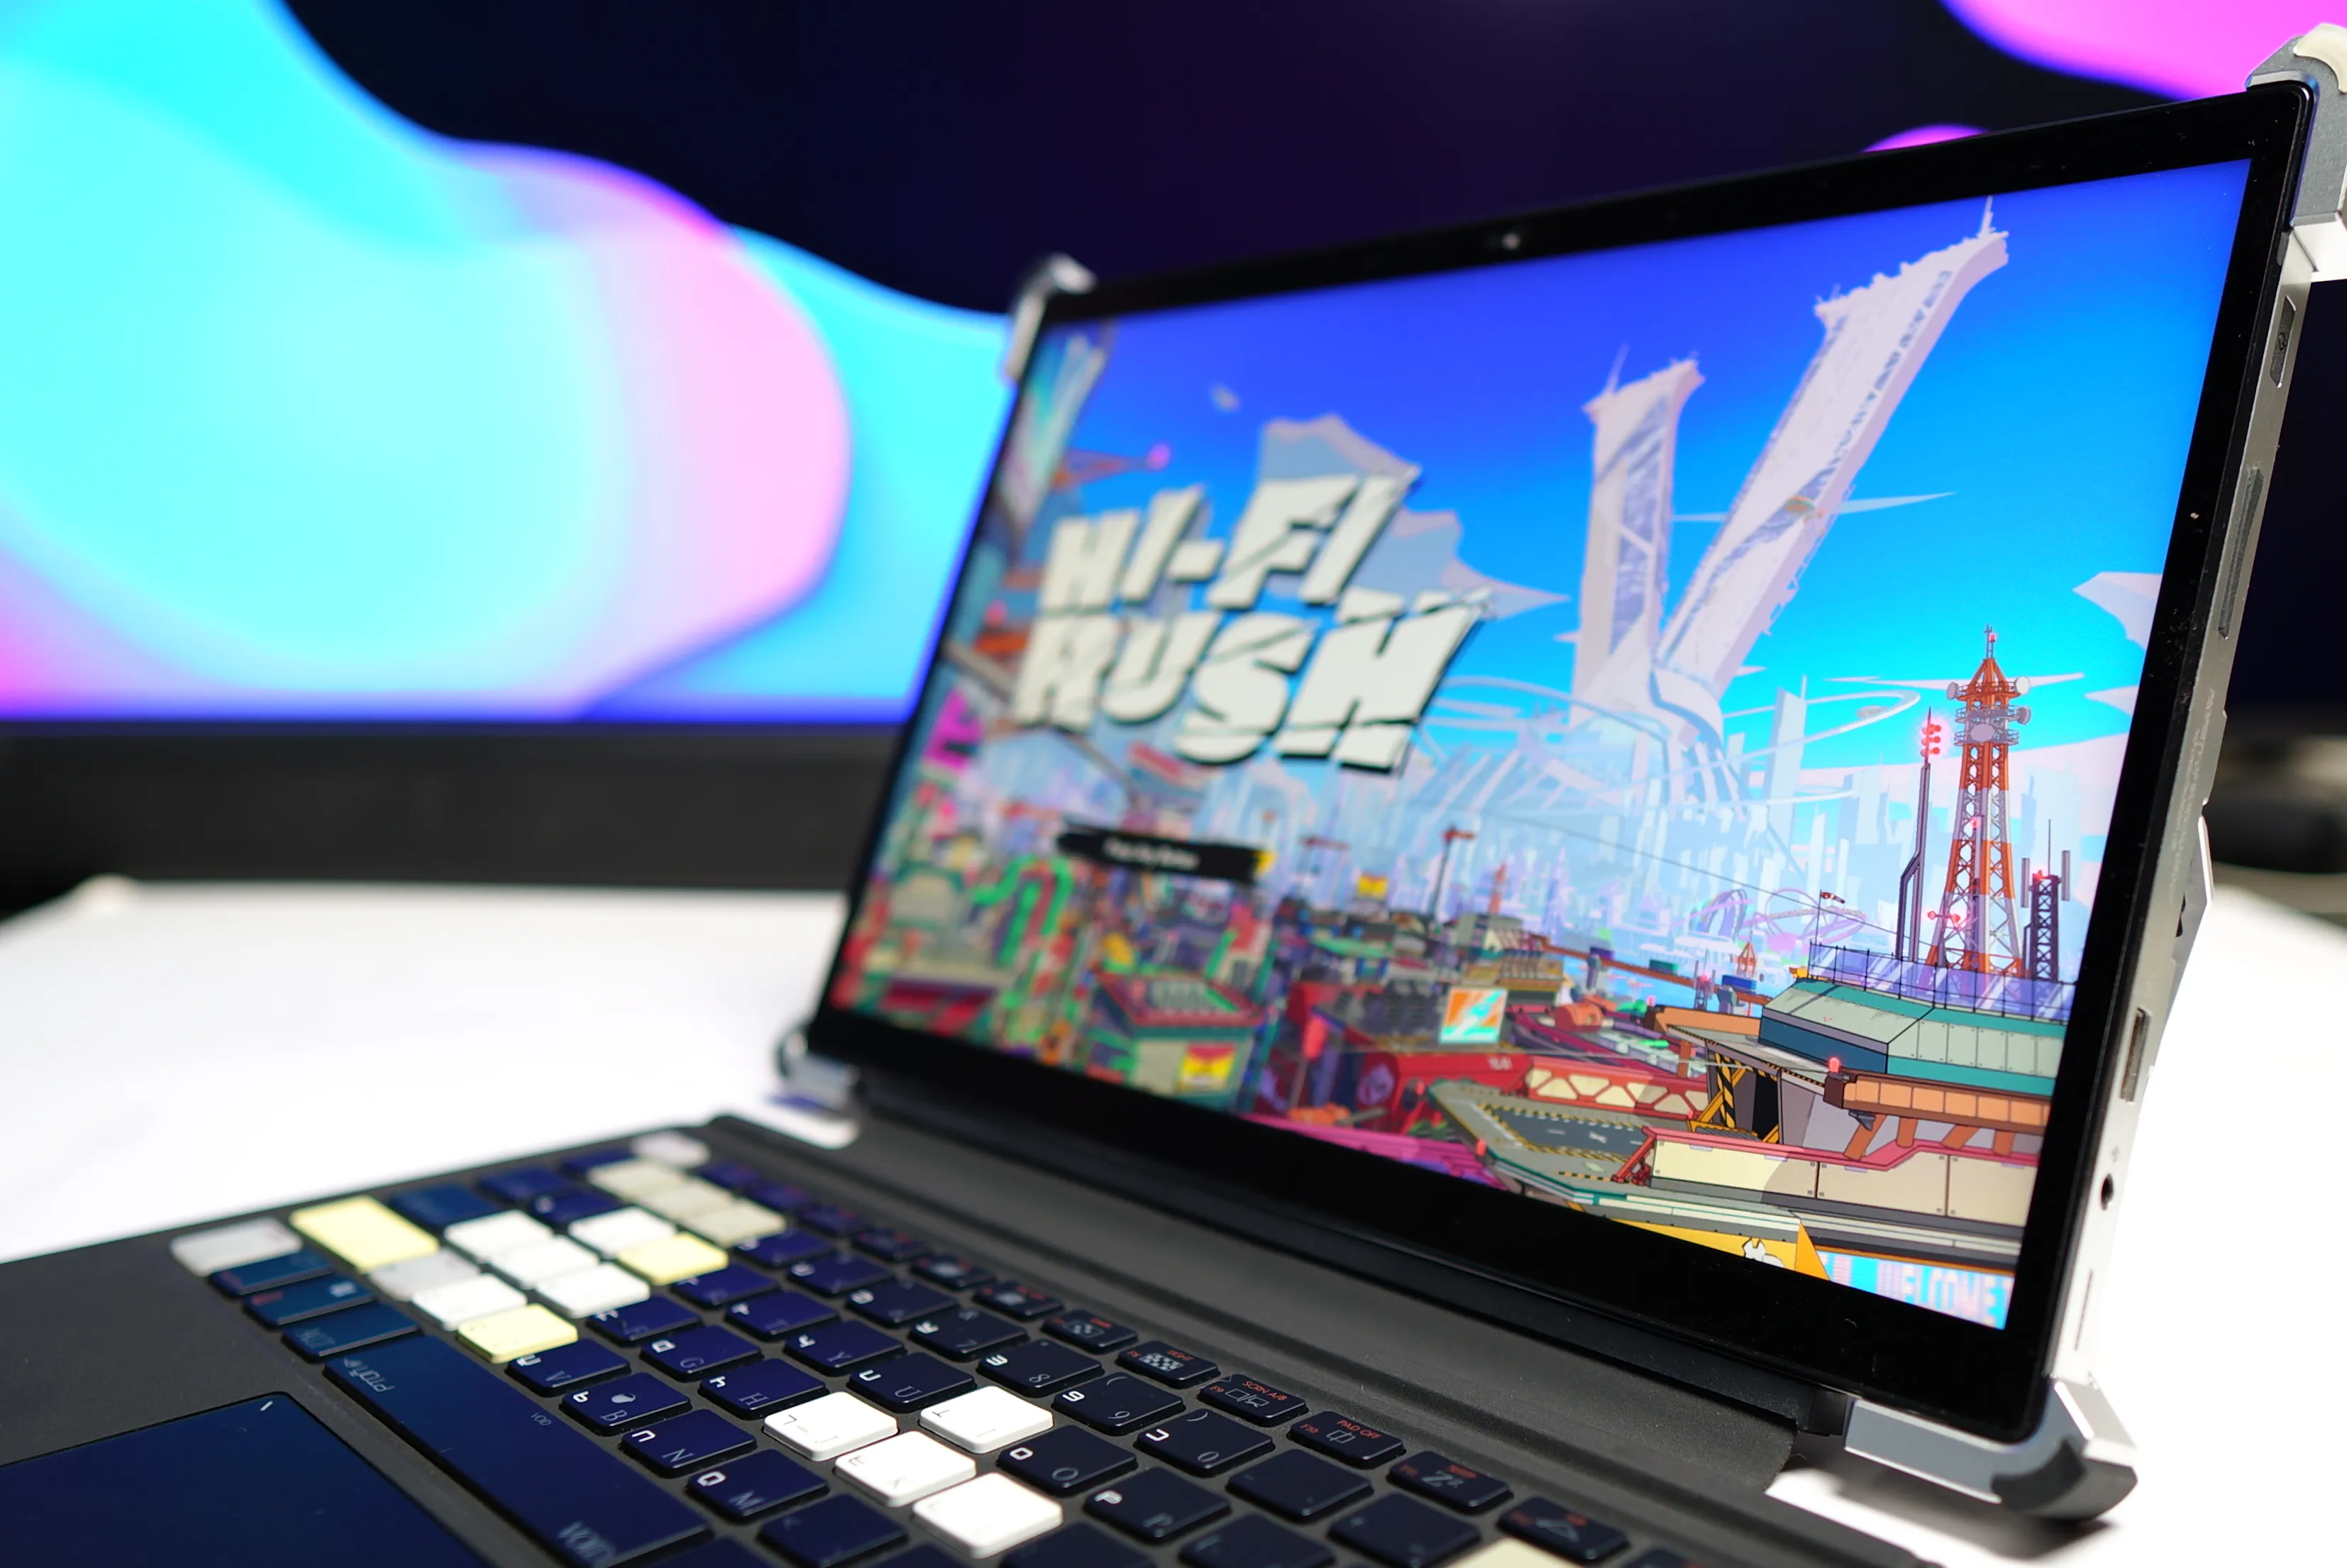 ROG Flow Z13 ACRNM features a 13.4-inch screen with vivid and accurate color reproduction.